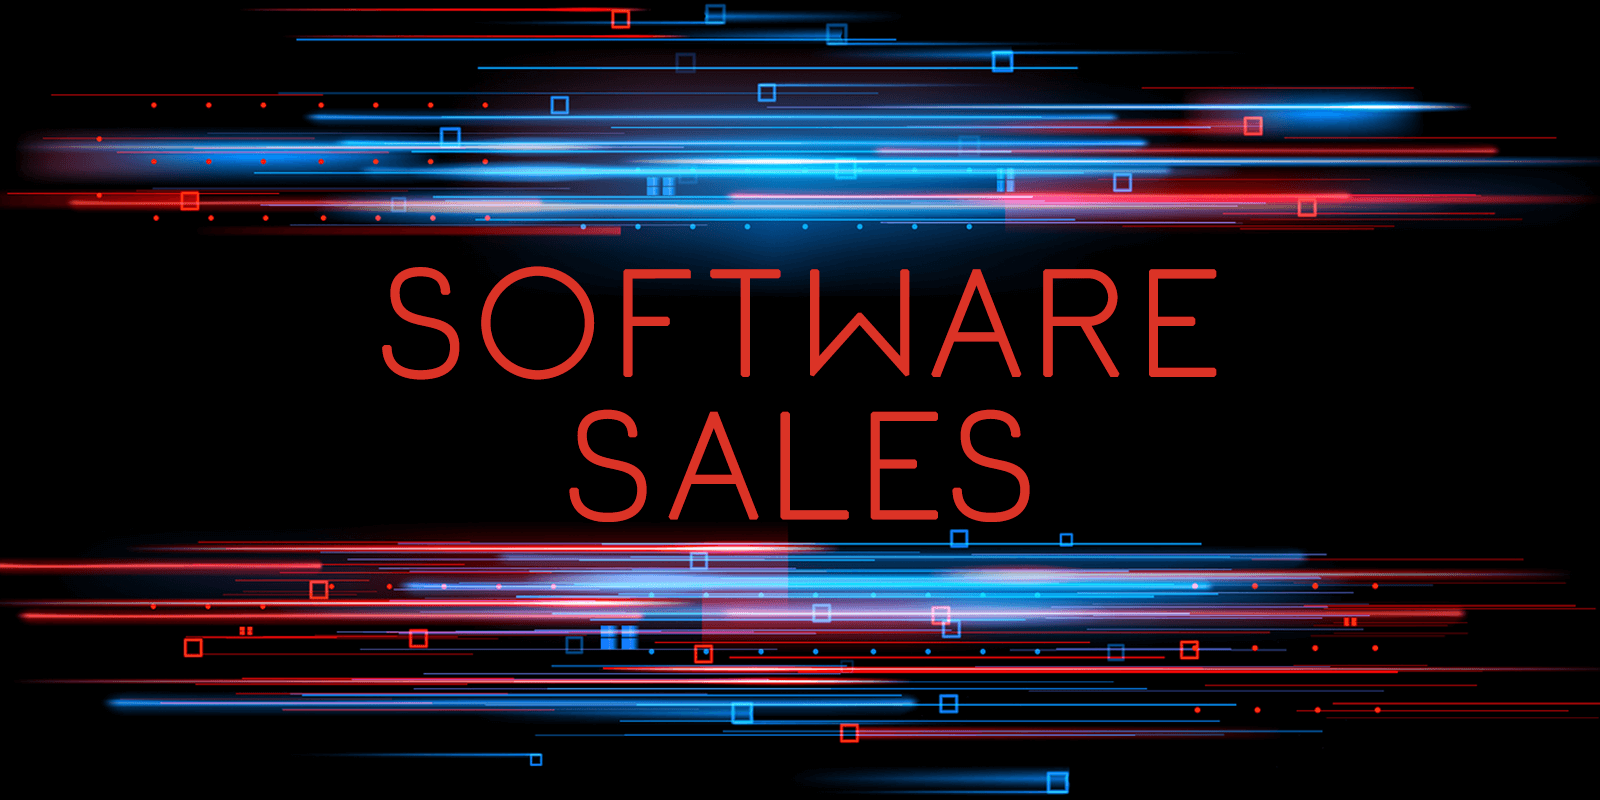 Tax Implications of Software Sales